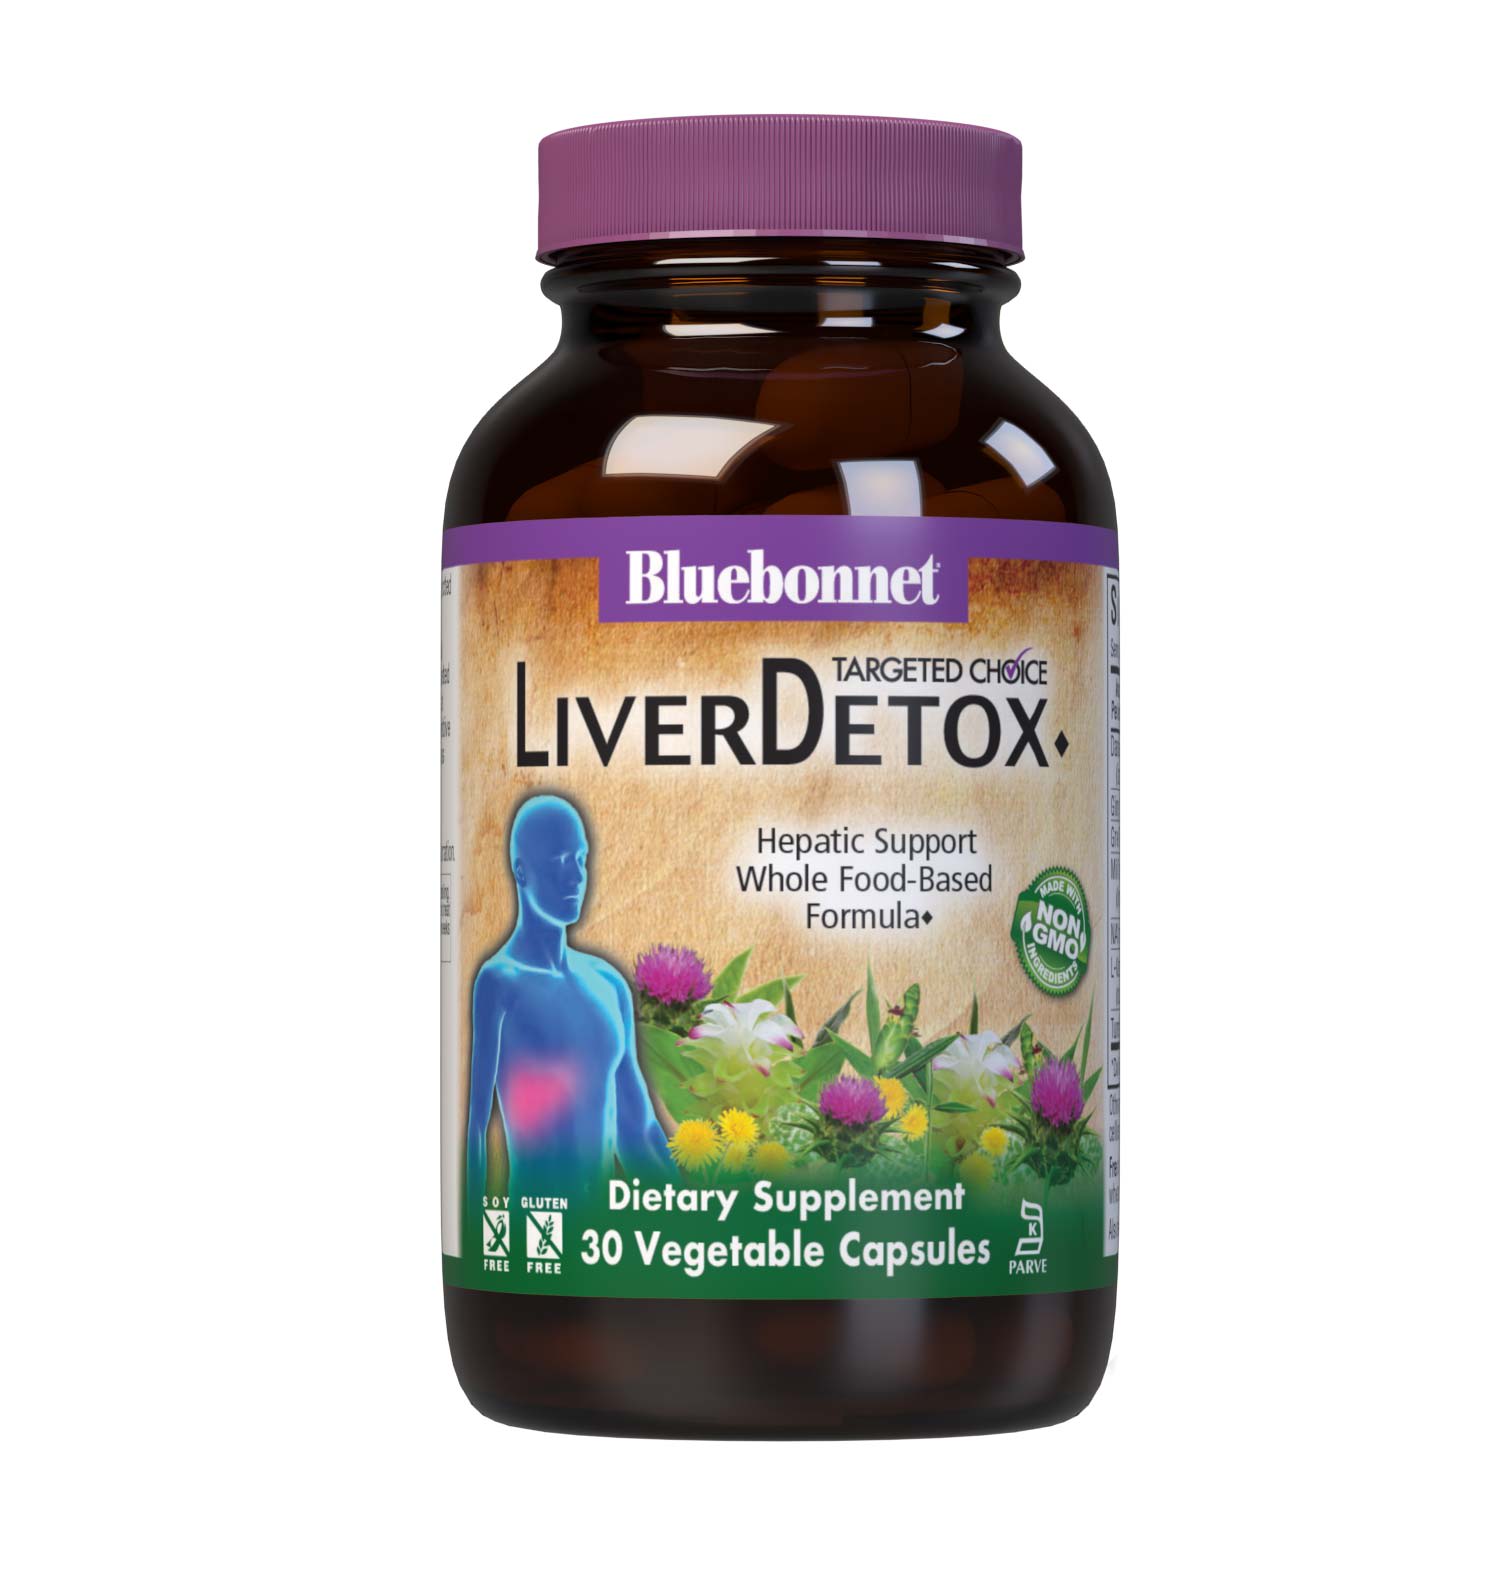 Bluebonnet’s Targeted Choice Liver Detox 30 Vegetable Capsules are specially formulated with a unique blend of amino acids and sustainably harvested or wildcrafted herbal extracts to support the body’s detoxification and elimination pathways by promoting a healthy liver and delivering effective antioxidant protection. #size_30 count